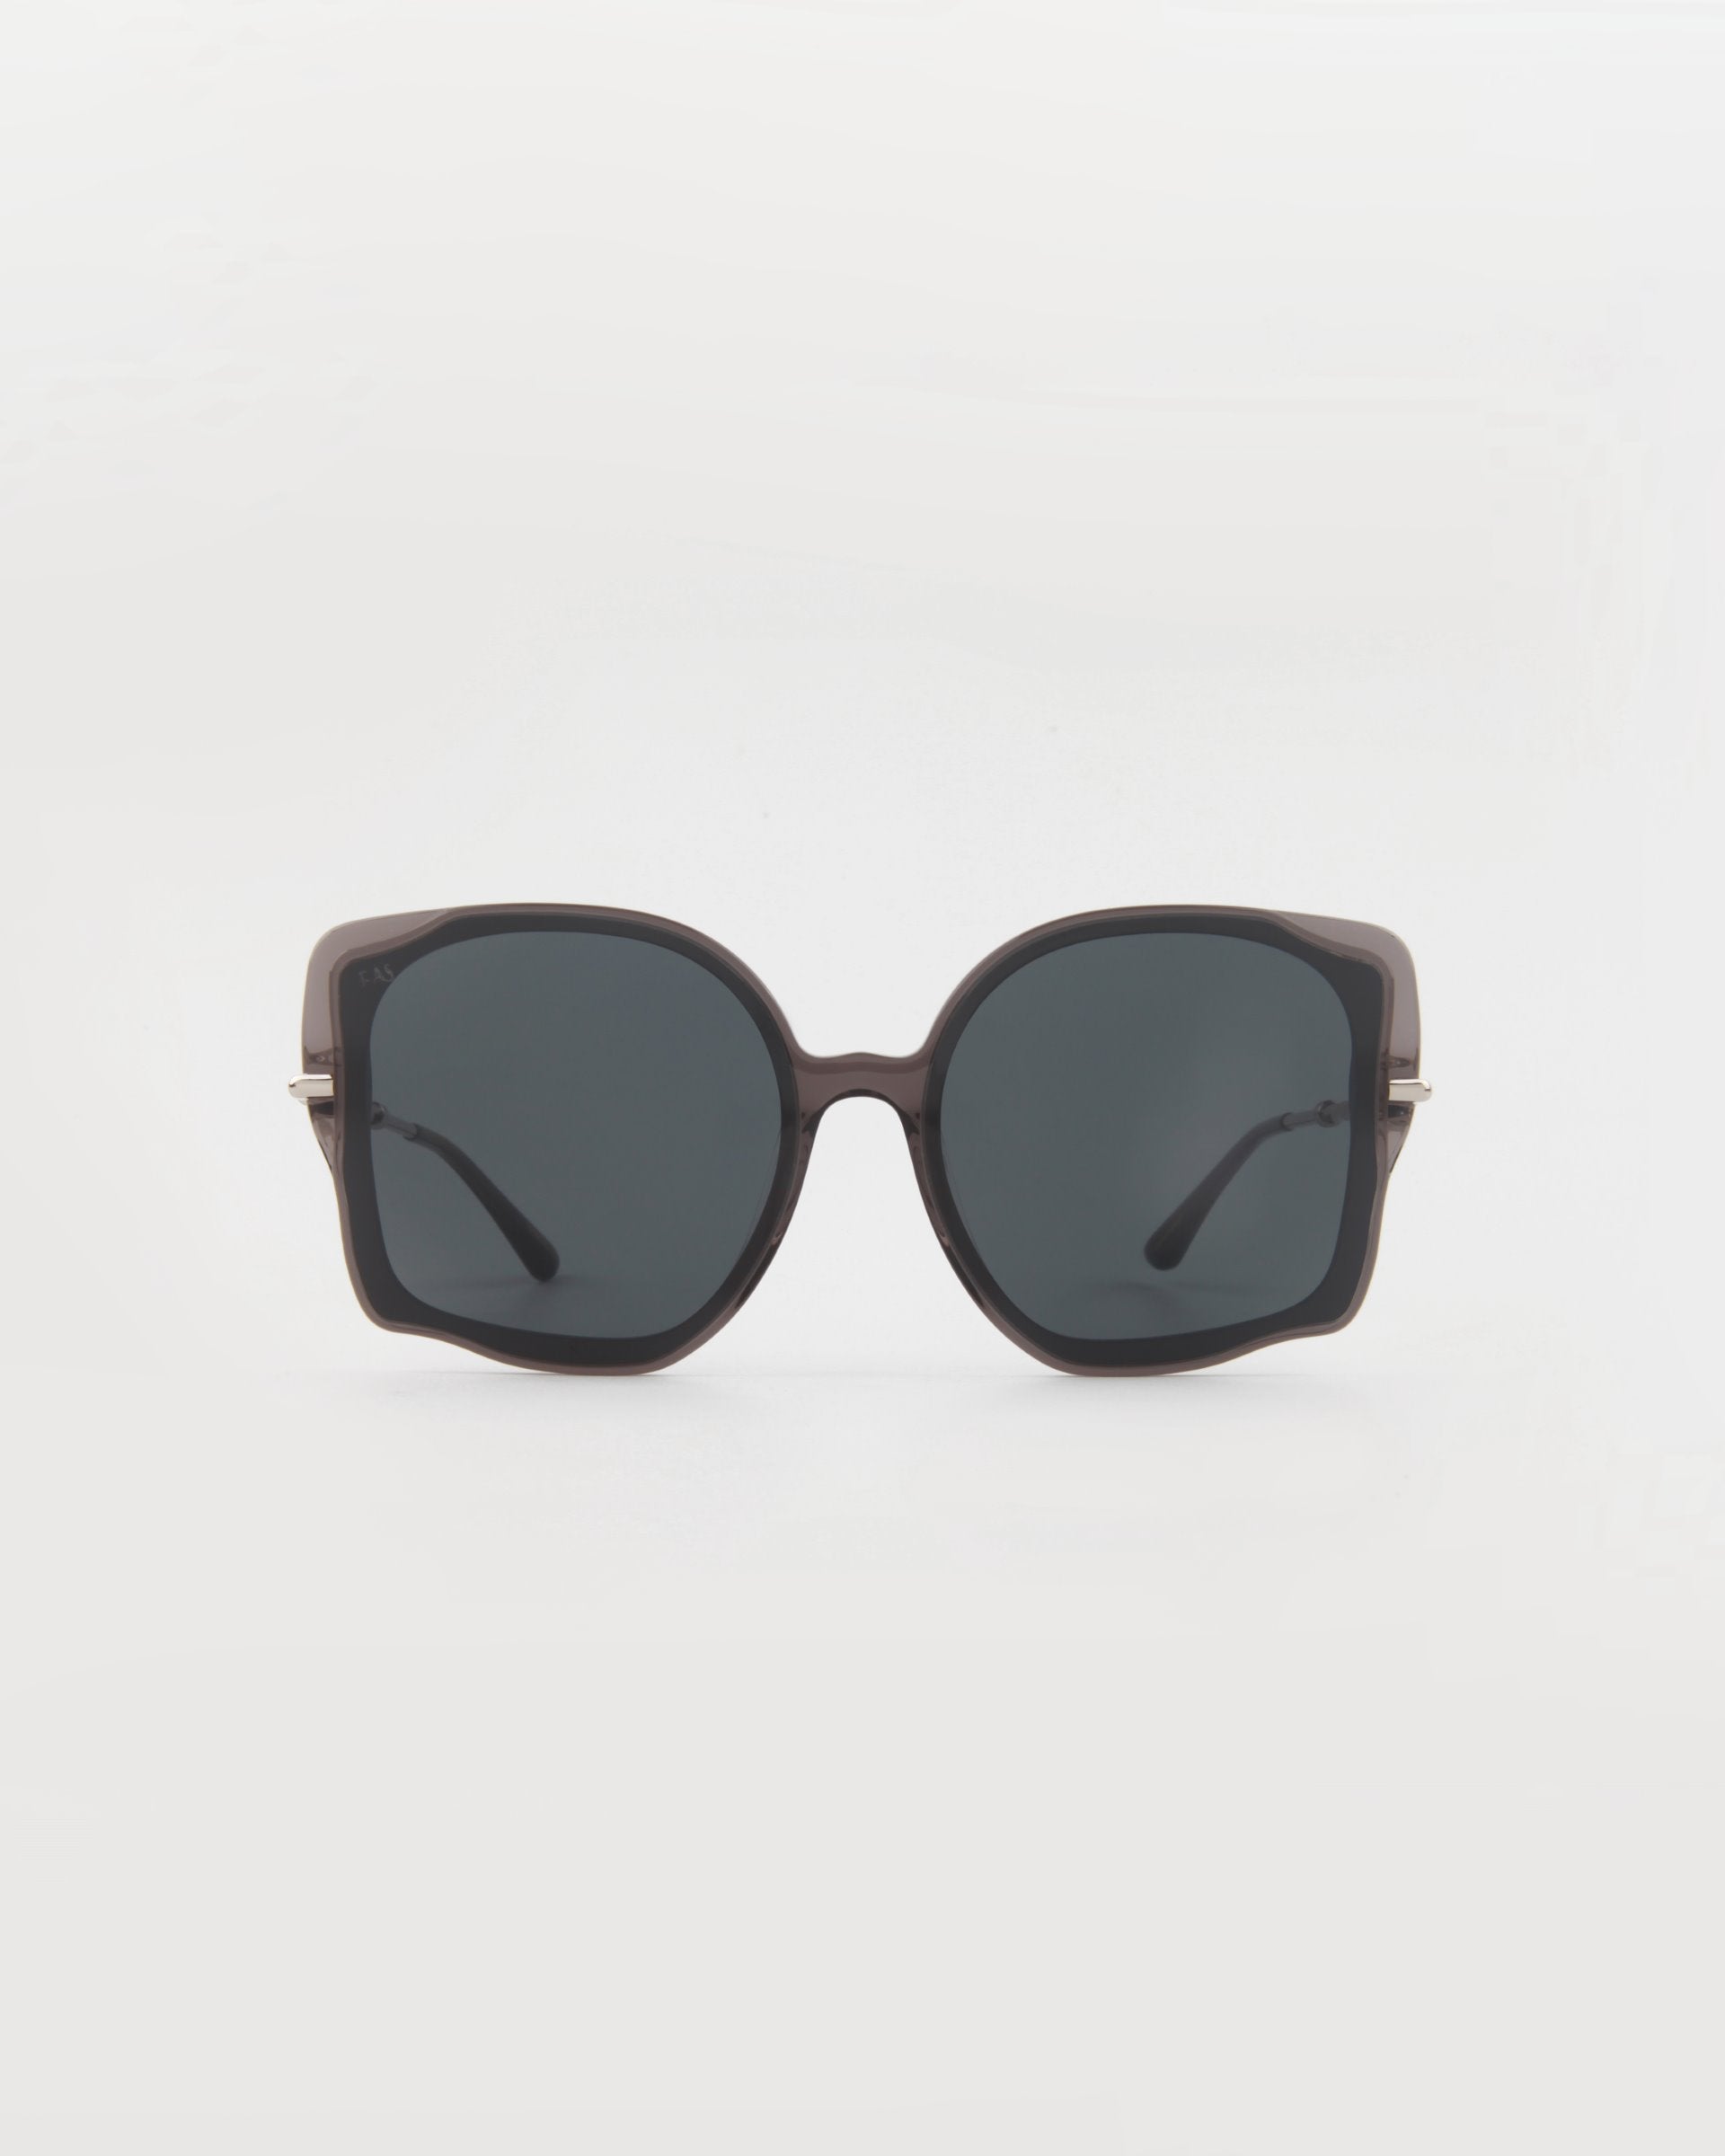 A pair of oversized, handmade acetate sunglasses featuring square-shaped, dark brown frames and dark-tinted lenses with 18-karat gold-plated arms, displayed against a plain white background. This is the Fahrenheit by For Art's Sake®.